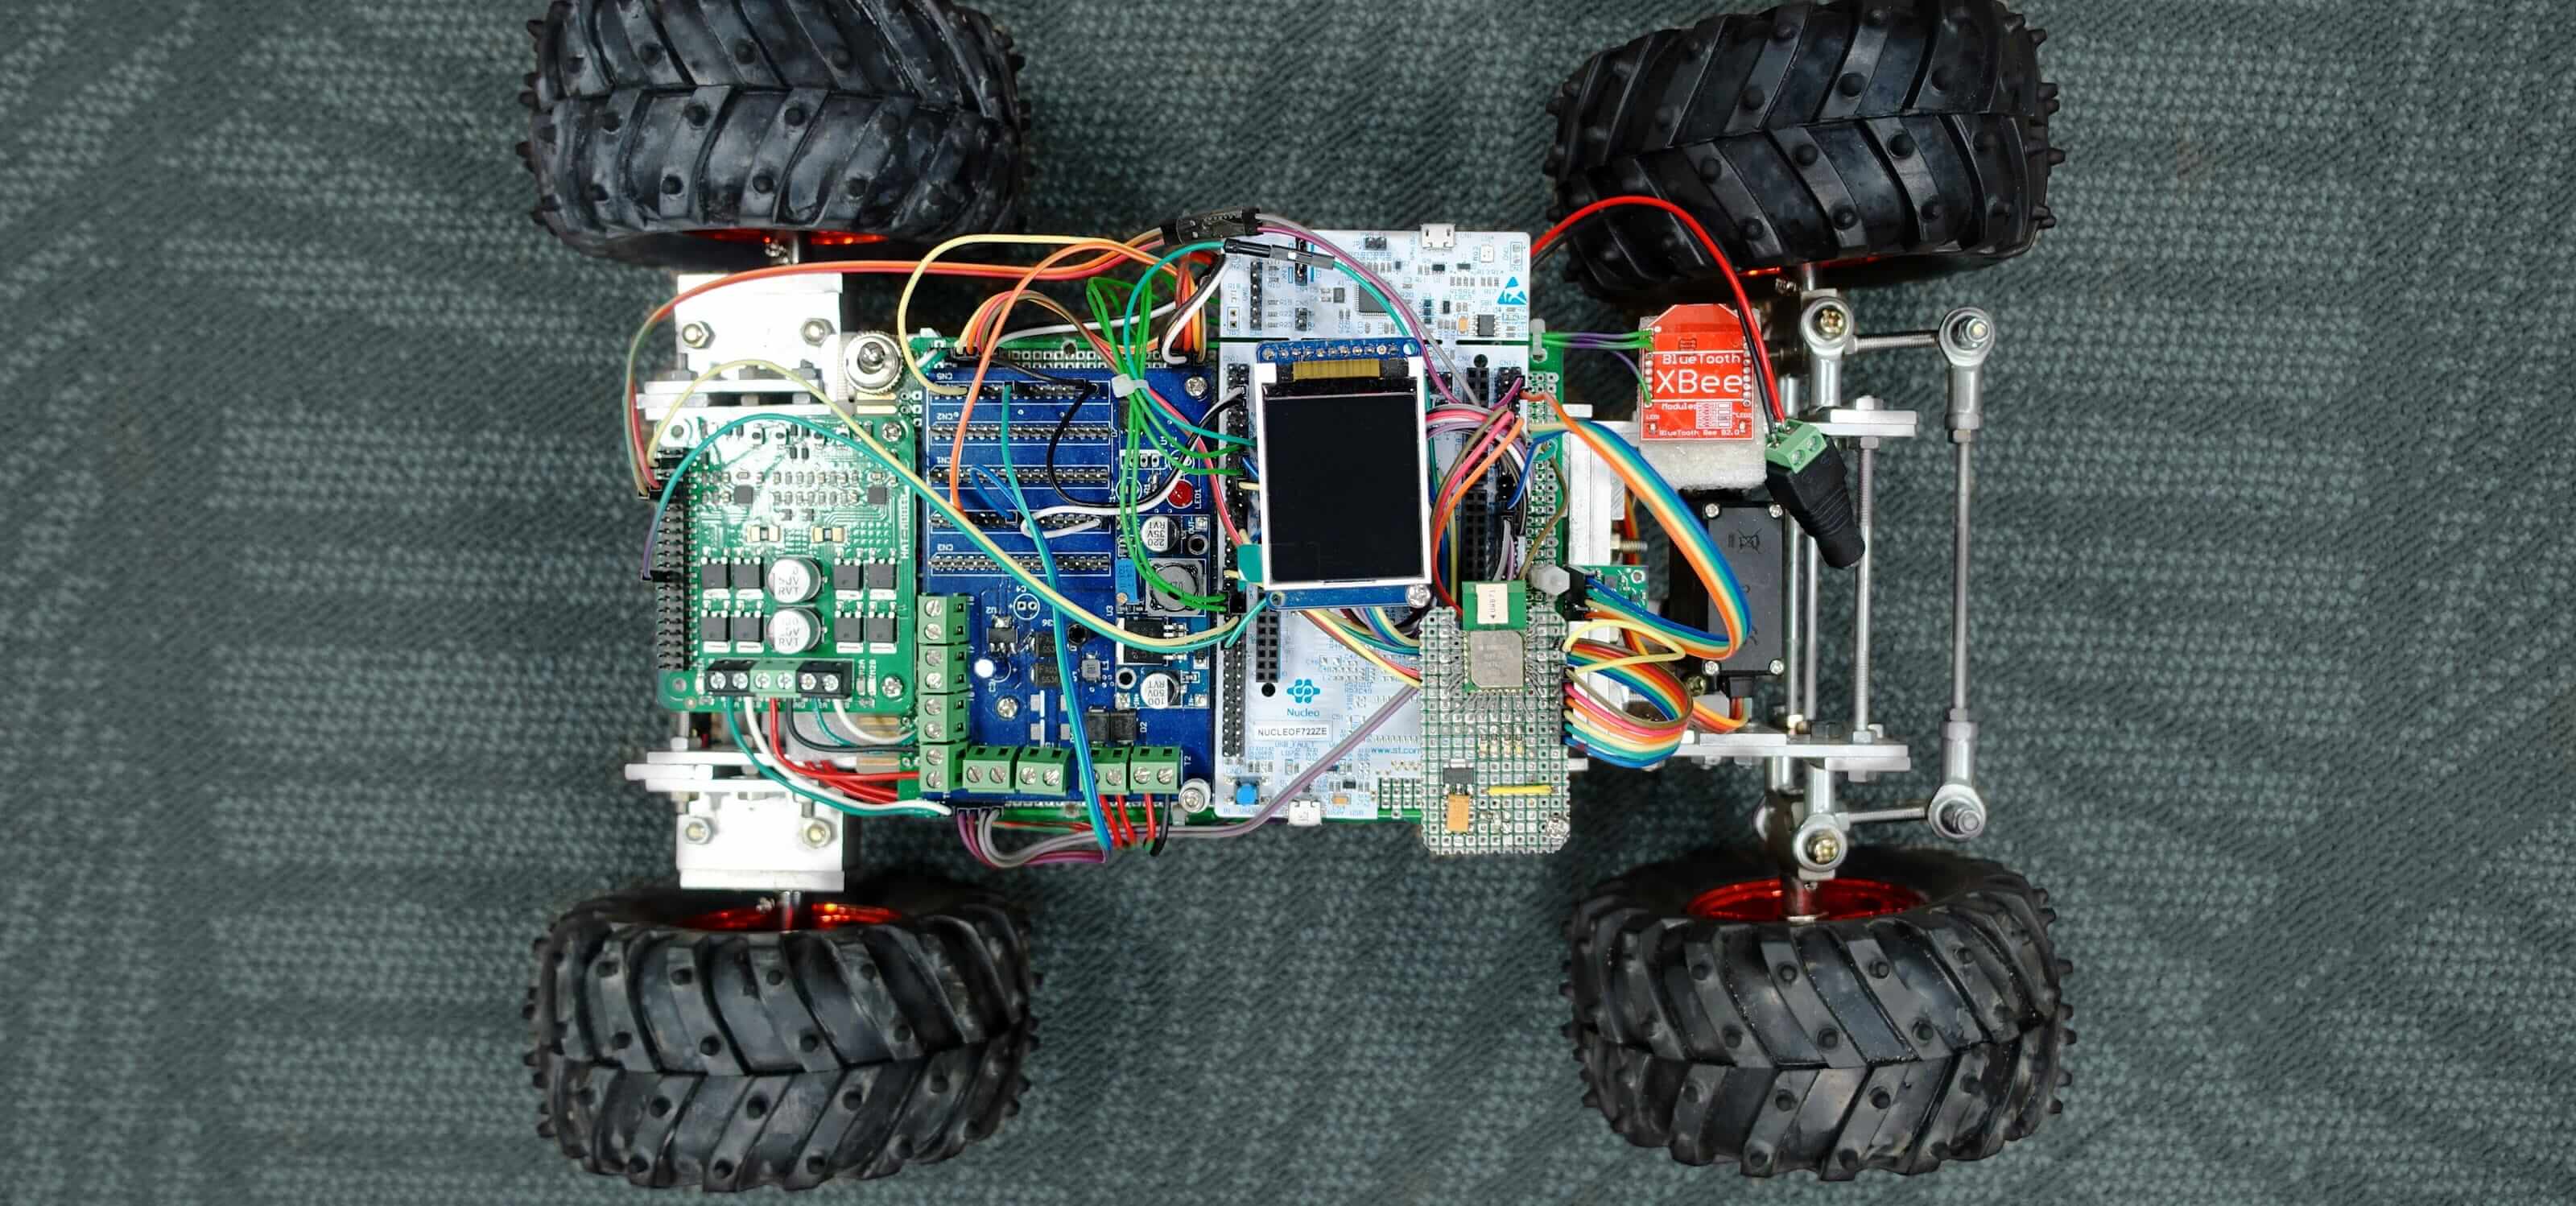 A model racing car seen from above with textured black tires and colorful exposed wiring and circuit board.